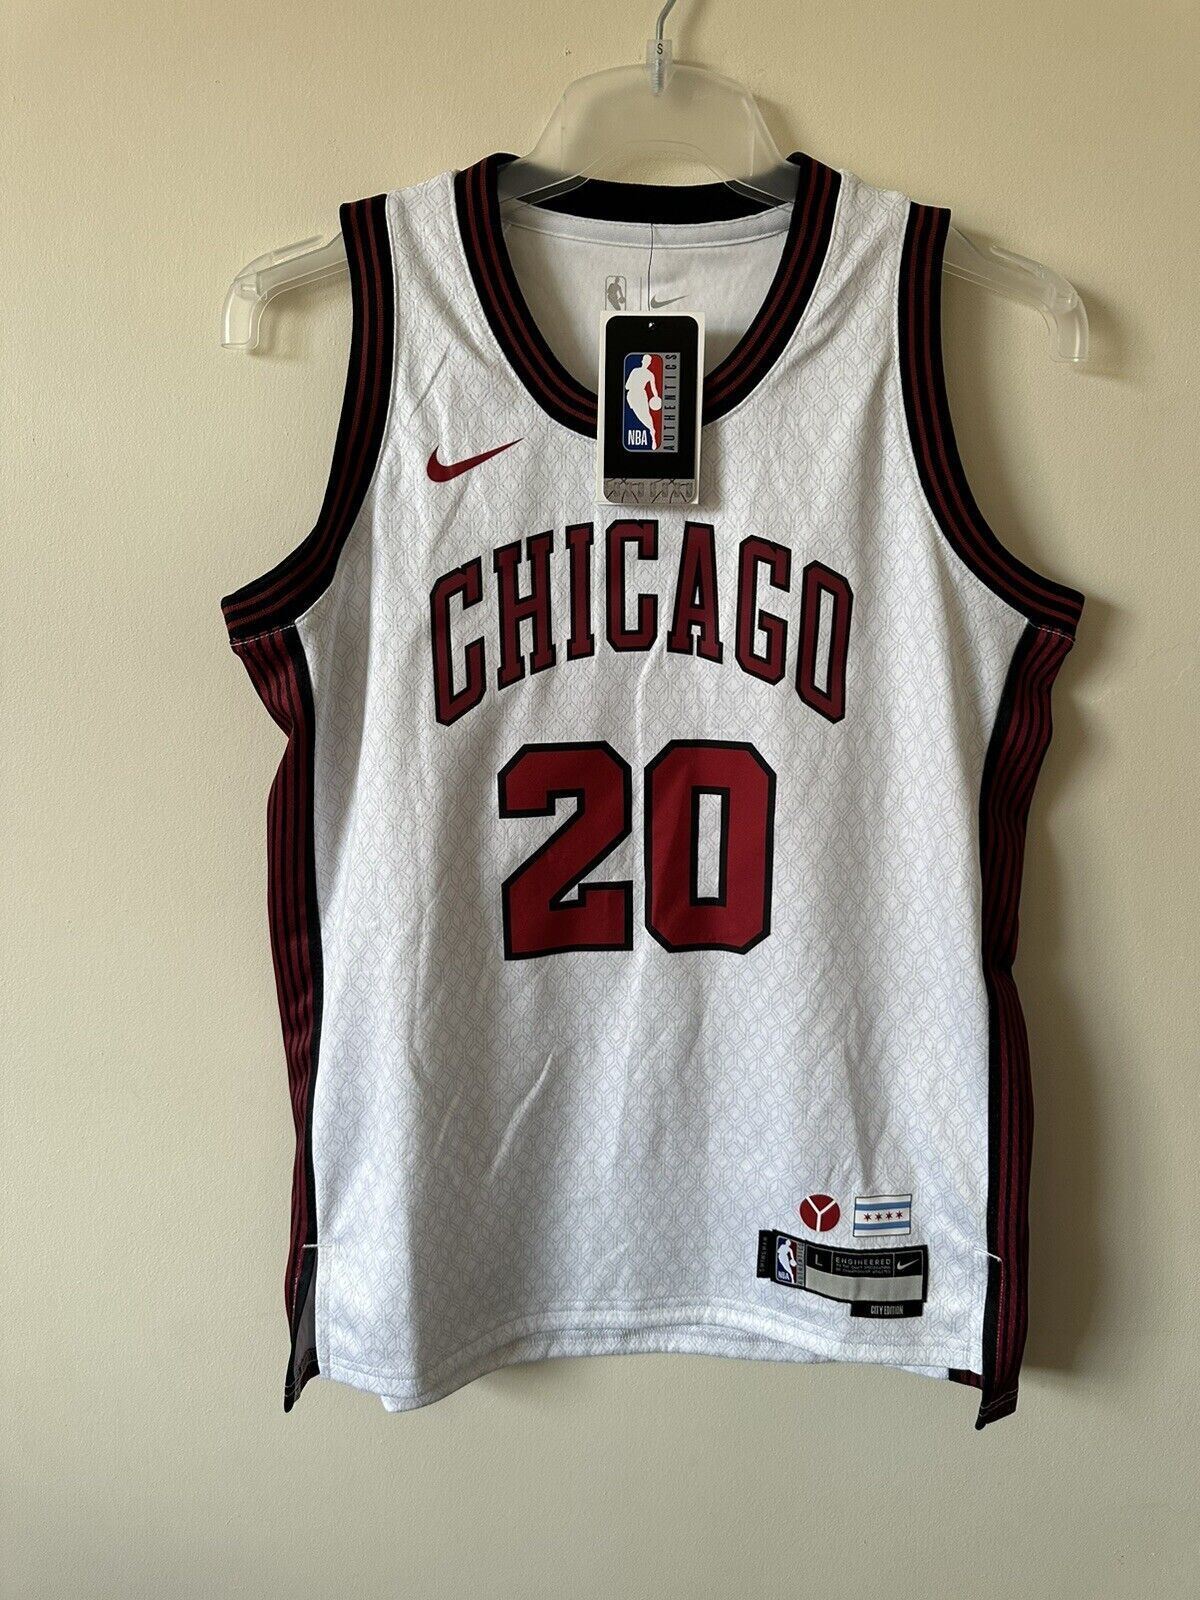 Nike NBA Chicago Bulls City Edition Jersey DIOGGY Youth 12-13 Years